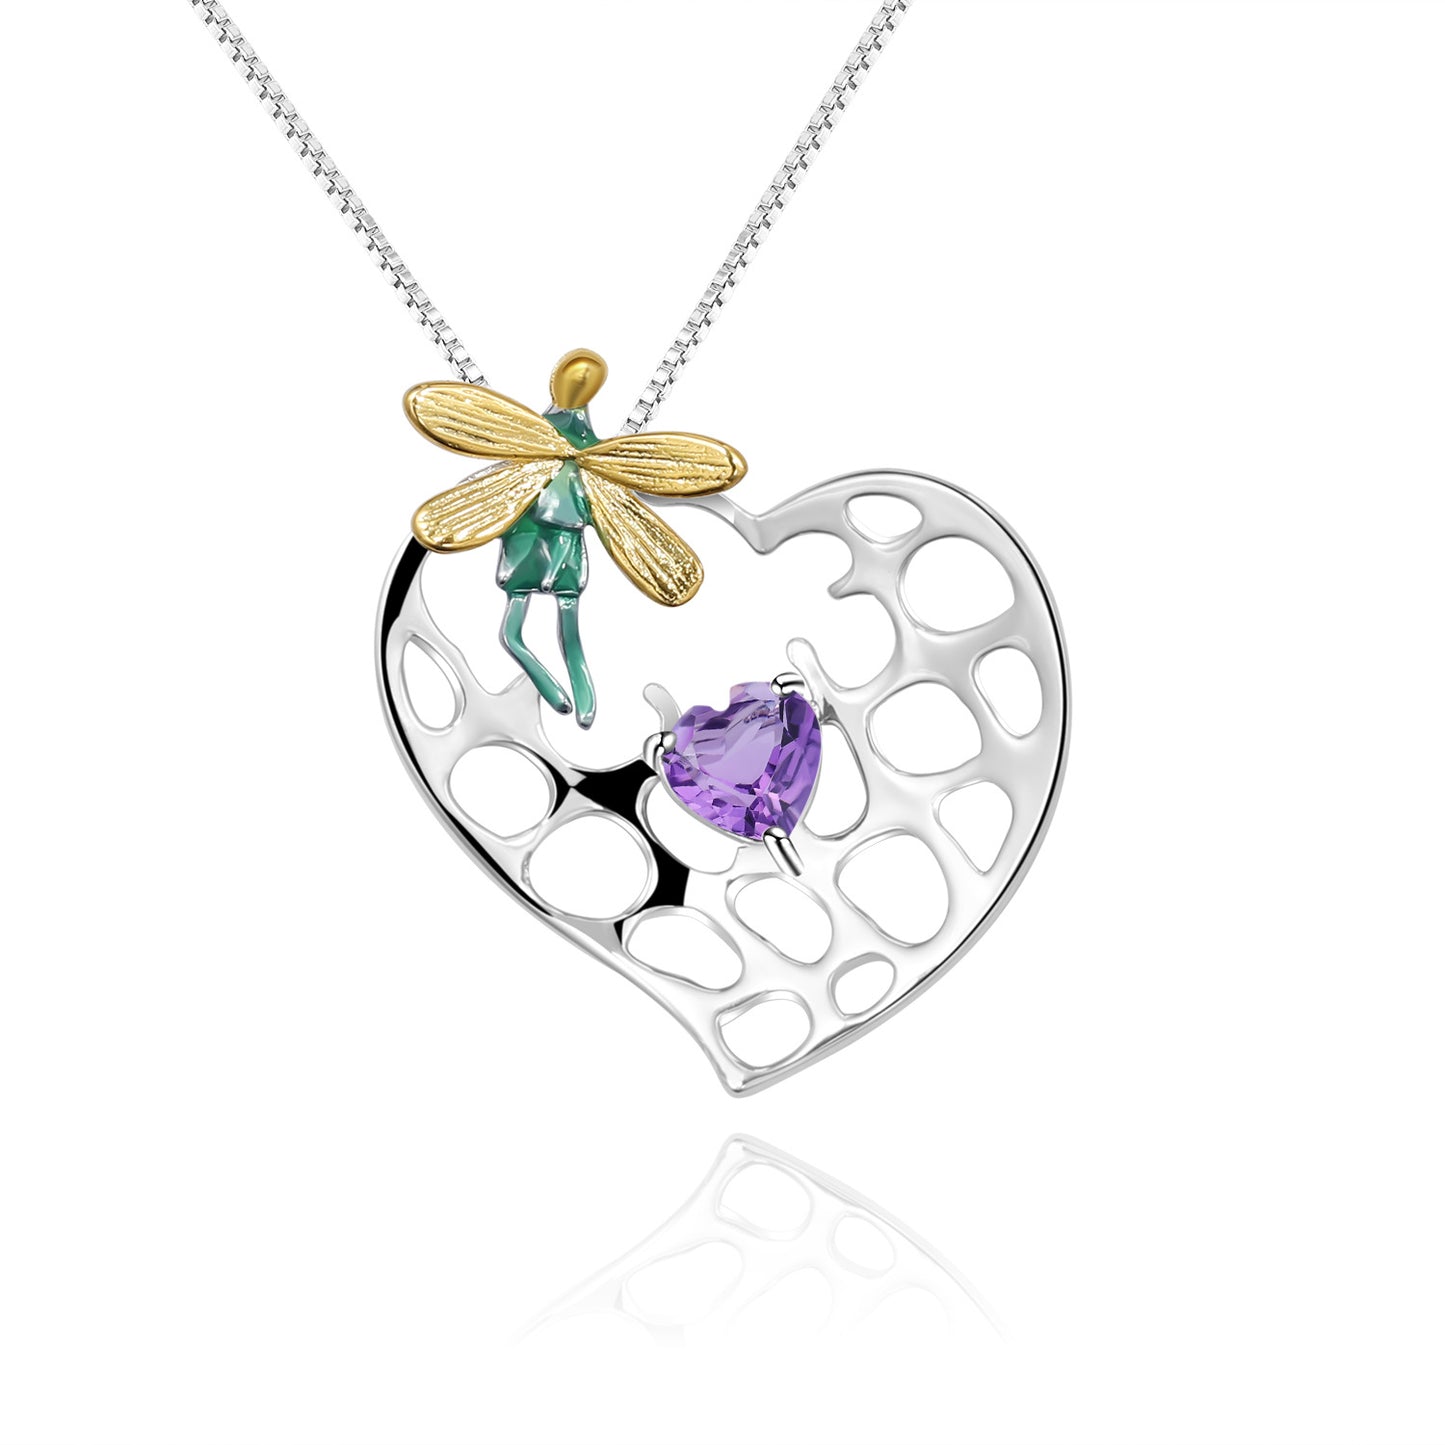 Natural Colourful Gemstone Enamel Heart of Peter Pan Pendant Silver Necklace for Women